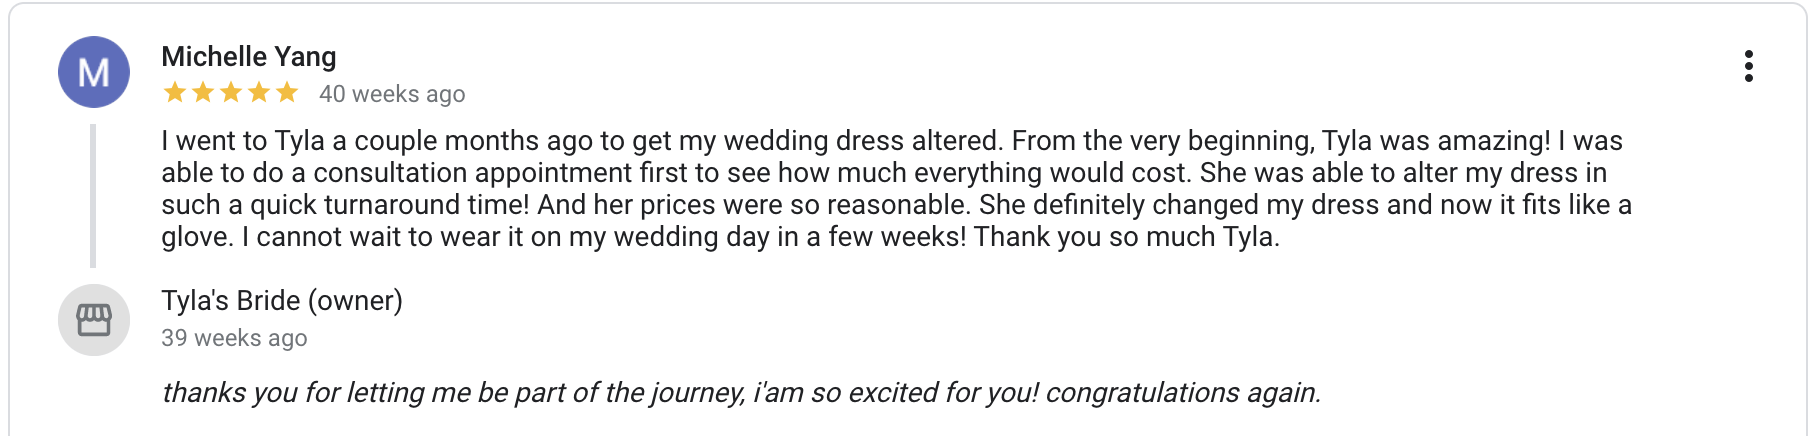 Michelle left a review for tyla's bride and how she was happy with her alteration process from beginning to end.